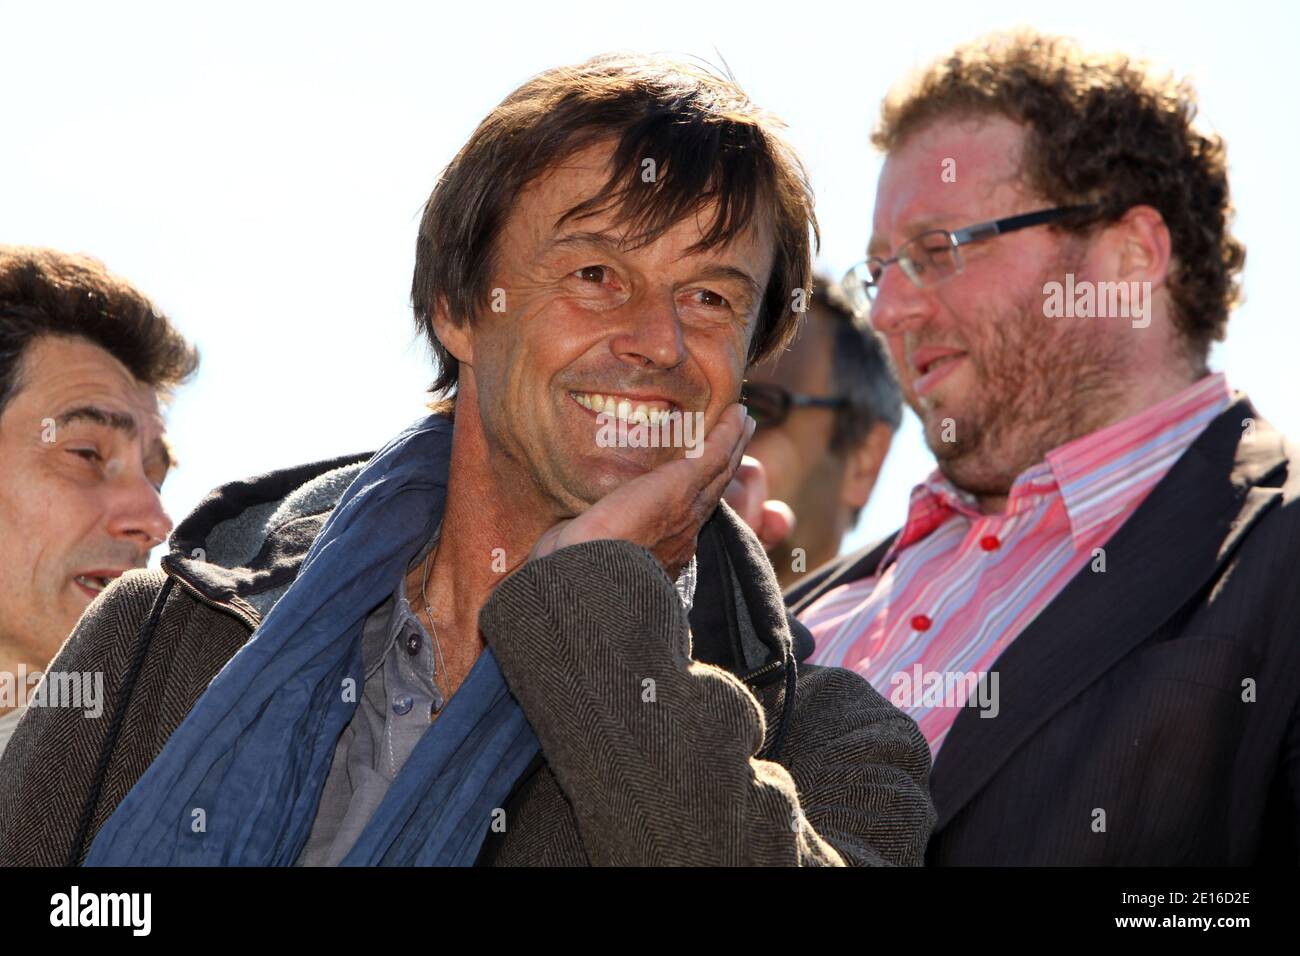 French television presenter, green activist and candidate declared for presidential election Nicolas Hulot is pictured during a visit at the slag heaps of 11/19 in Loos-en-Gohelle, near Lens, northern France, on May 4, 2011. Loos-en-Gohelle's slag heaps, in the former mining area of Pas-de-Calais, is the highest in Europe. Photo by Sylvain Lefevre/ABACAPRESS.COM Stock Photo